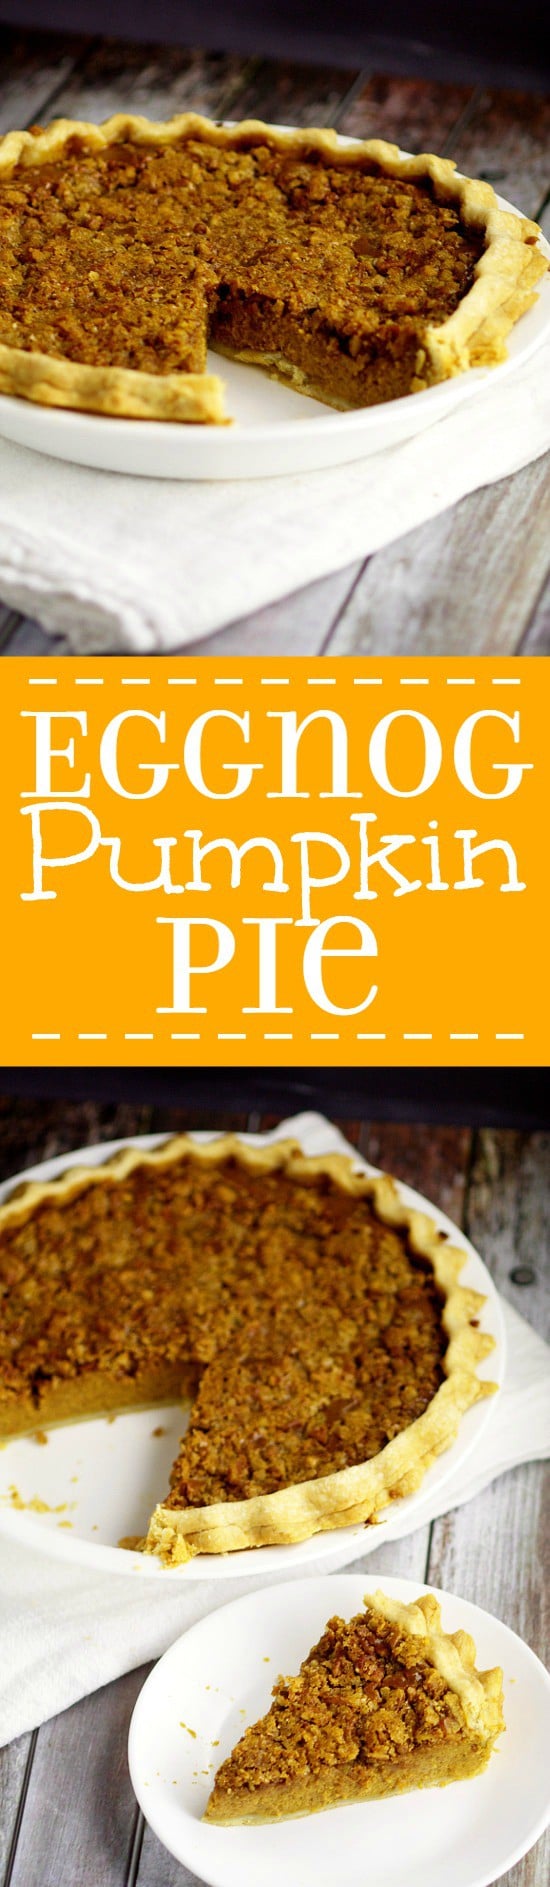 Creamy eggnog and spiced pumpkin come together in this heavenly Eggnog Pumpkin Pie recipe, topped with a crunchy, sweet brown sugar and pecan topping! Omg. Two of my favorites in one delicious pie recipe! Must try ASAP!